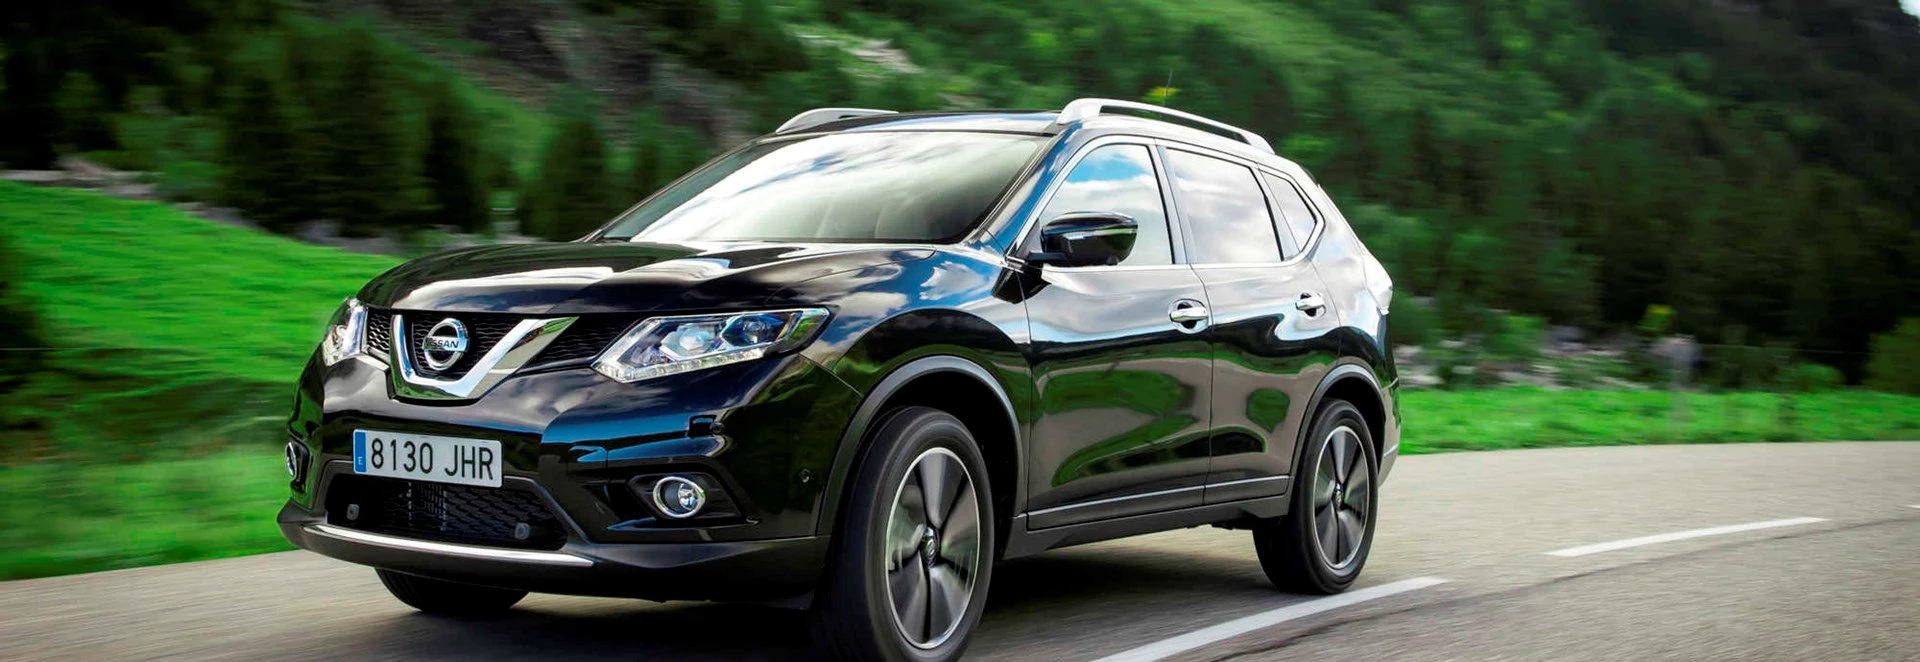 First car sold on Twitter is a Nissan X-Trail 